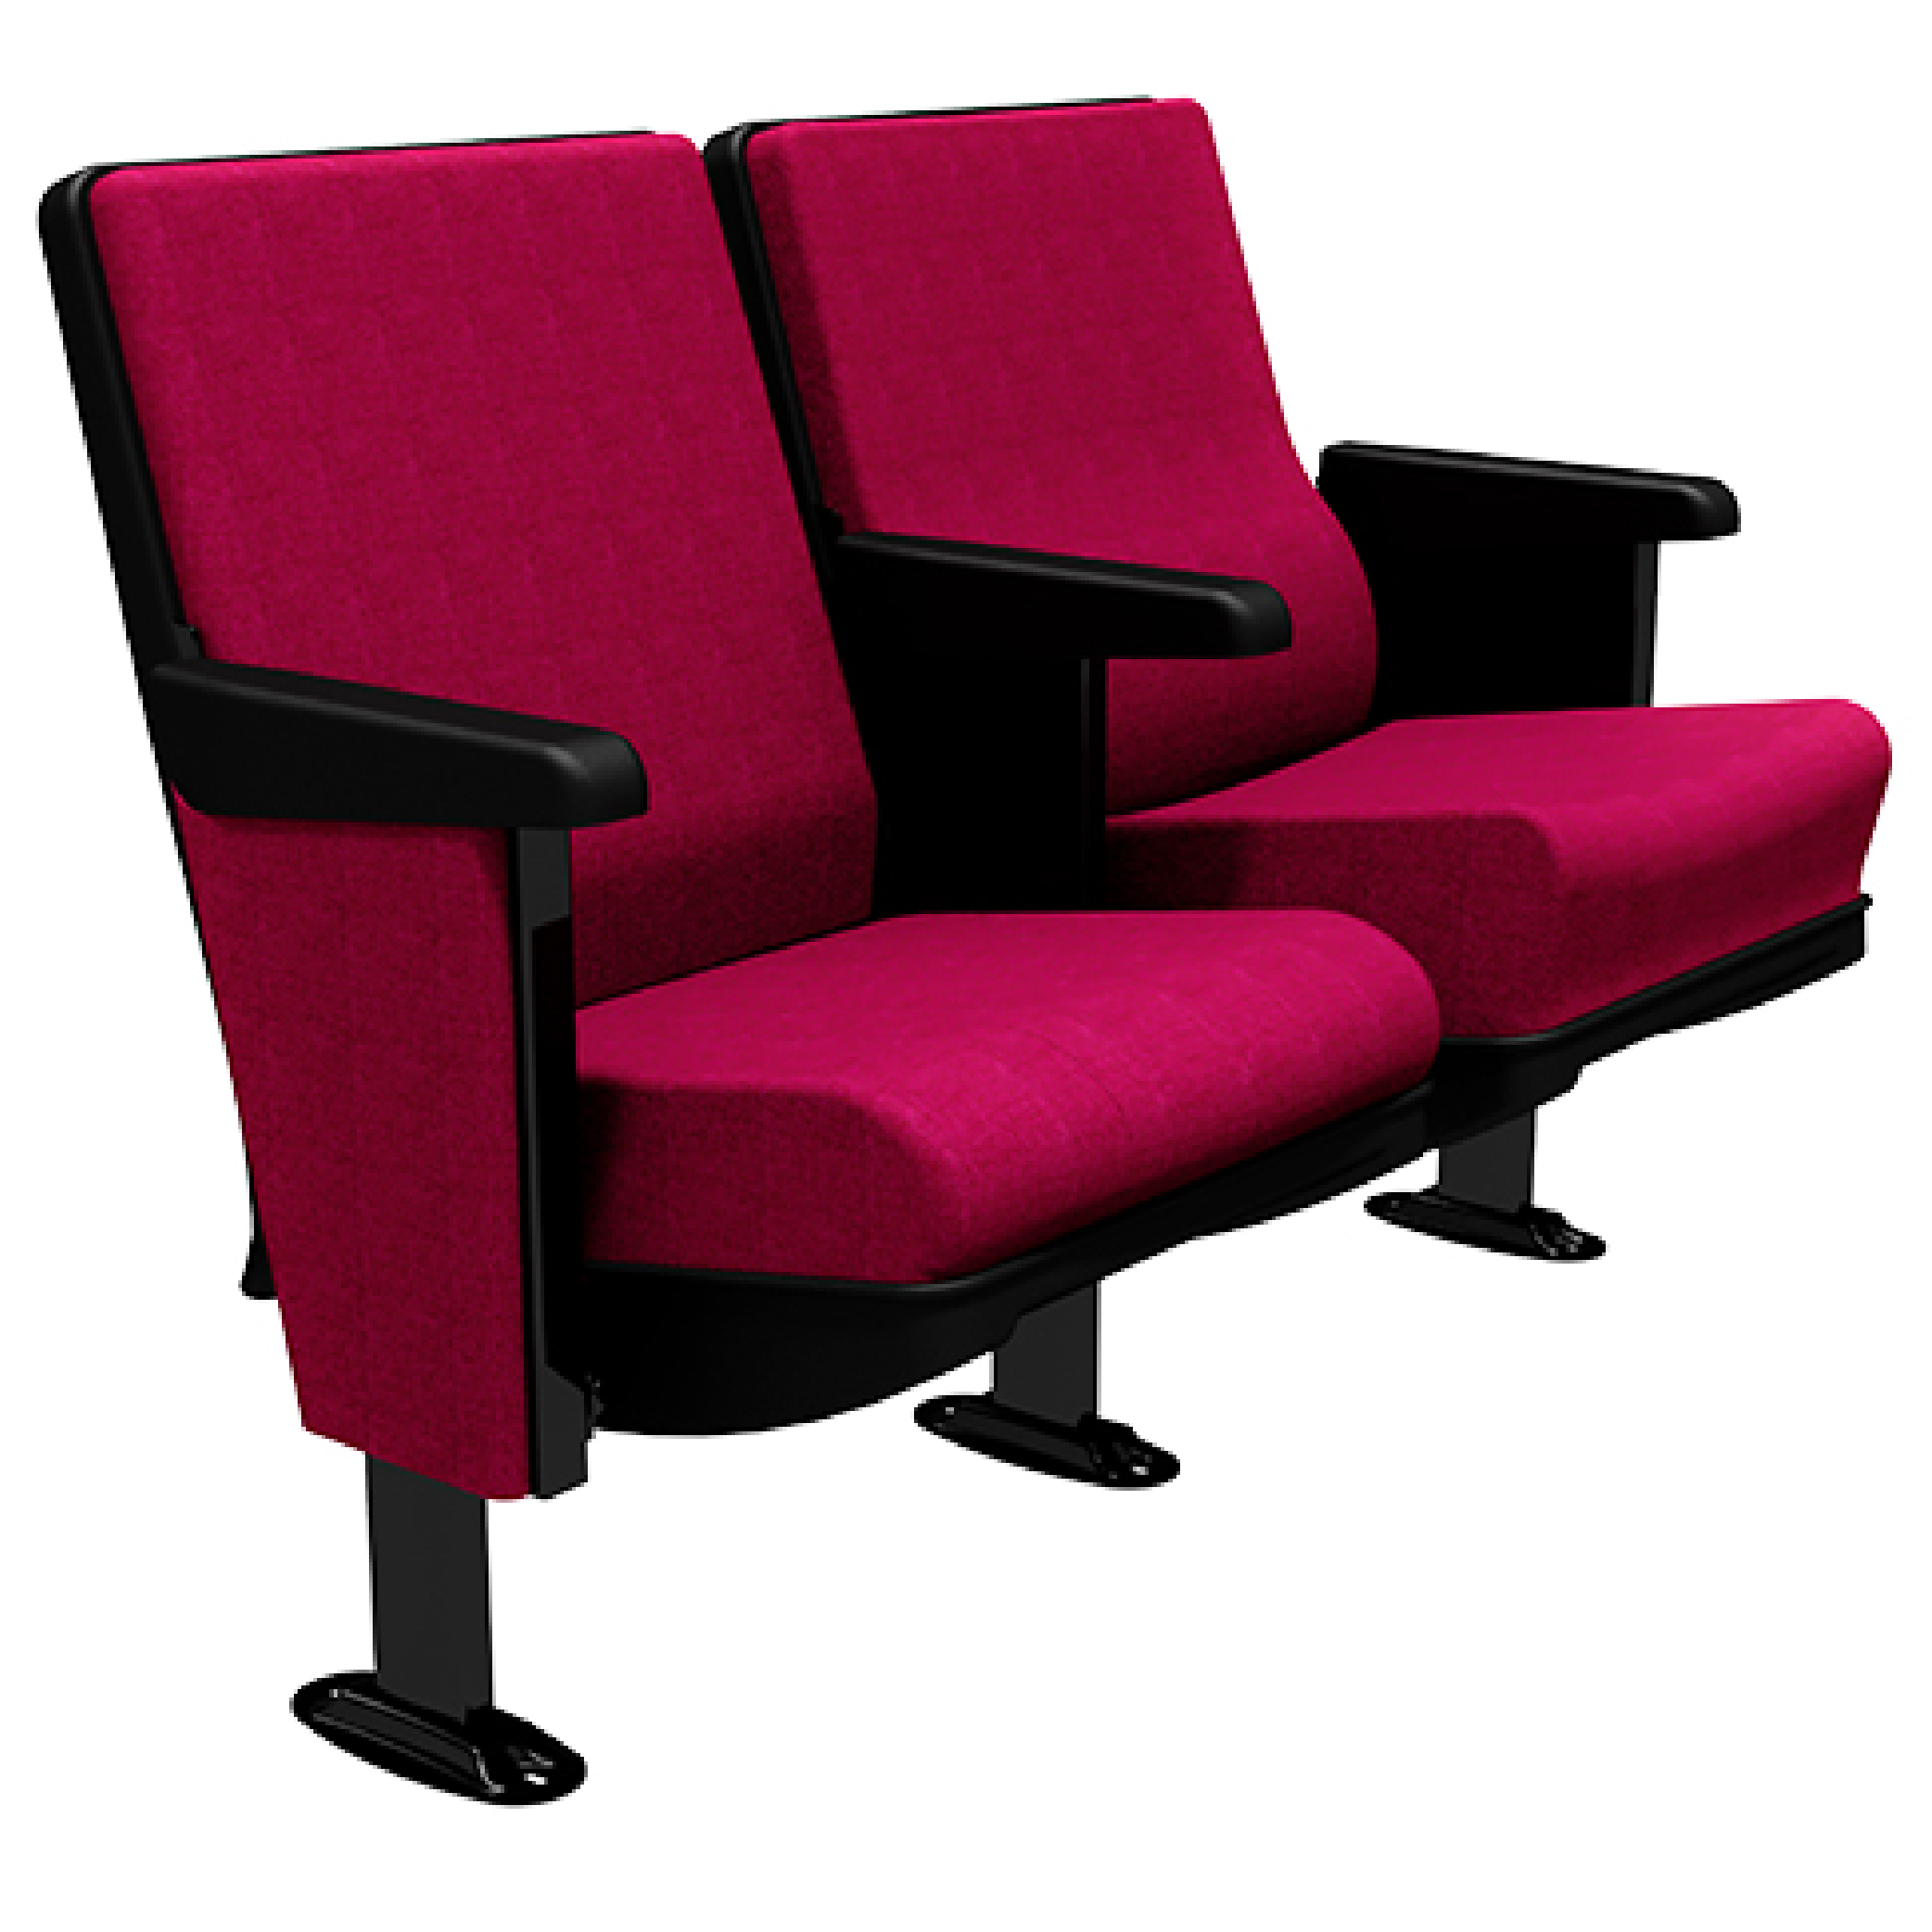 Our Convention T Model Theater seat for churches and synagogues from Woods Church Interiors